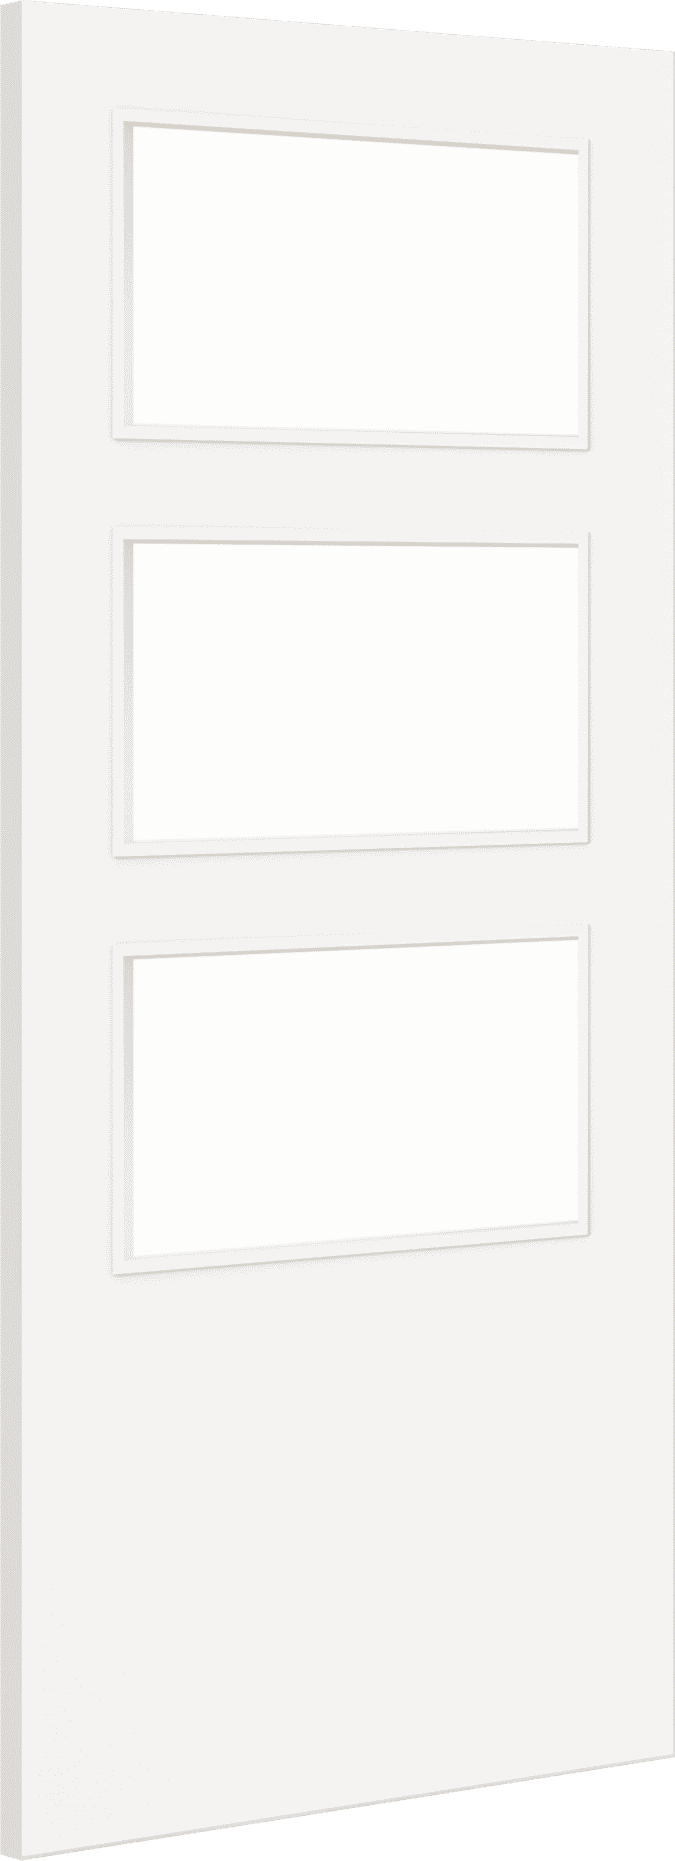 1981mm x 533mm x 44mm (21") Architectural Paint Grade White 03 Clear Glazed Fire Door Blank